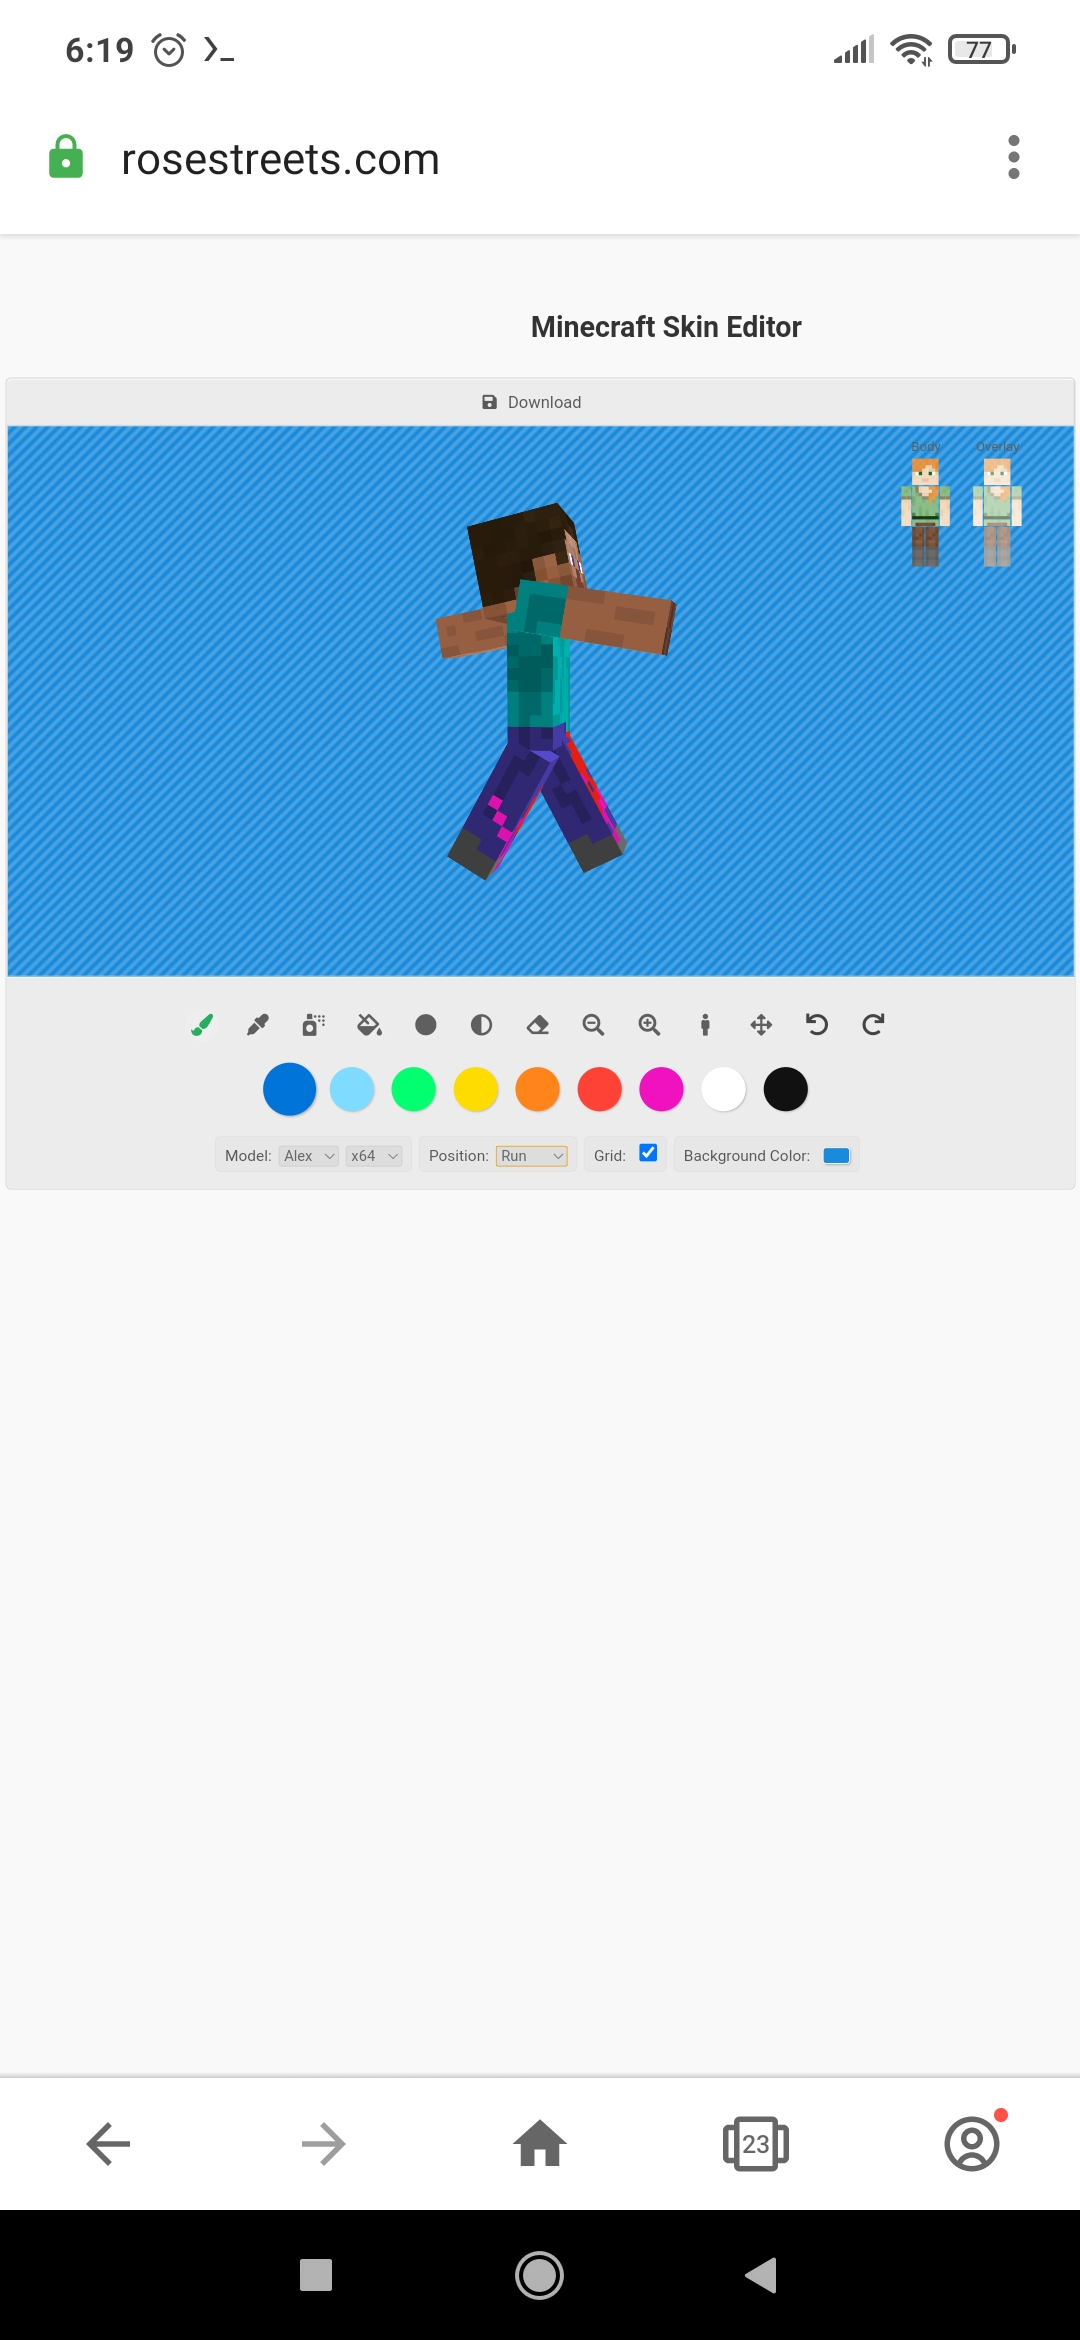 Skin Editor 3D For Minecraft Game, Android and iOS